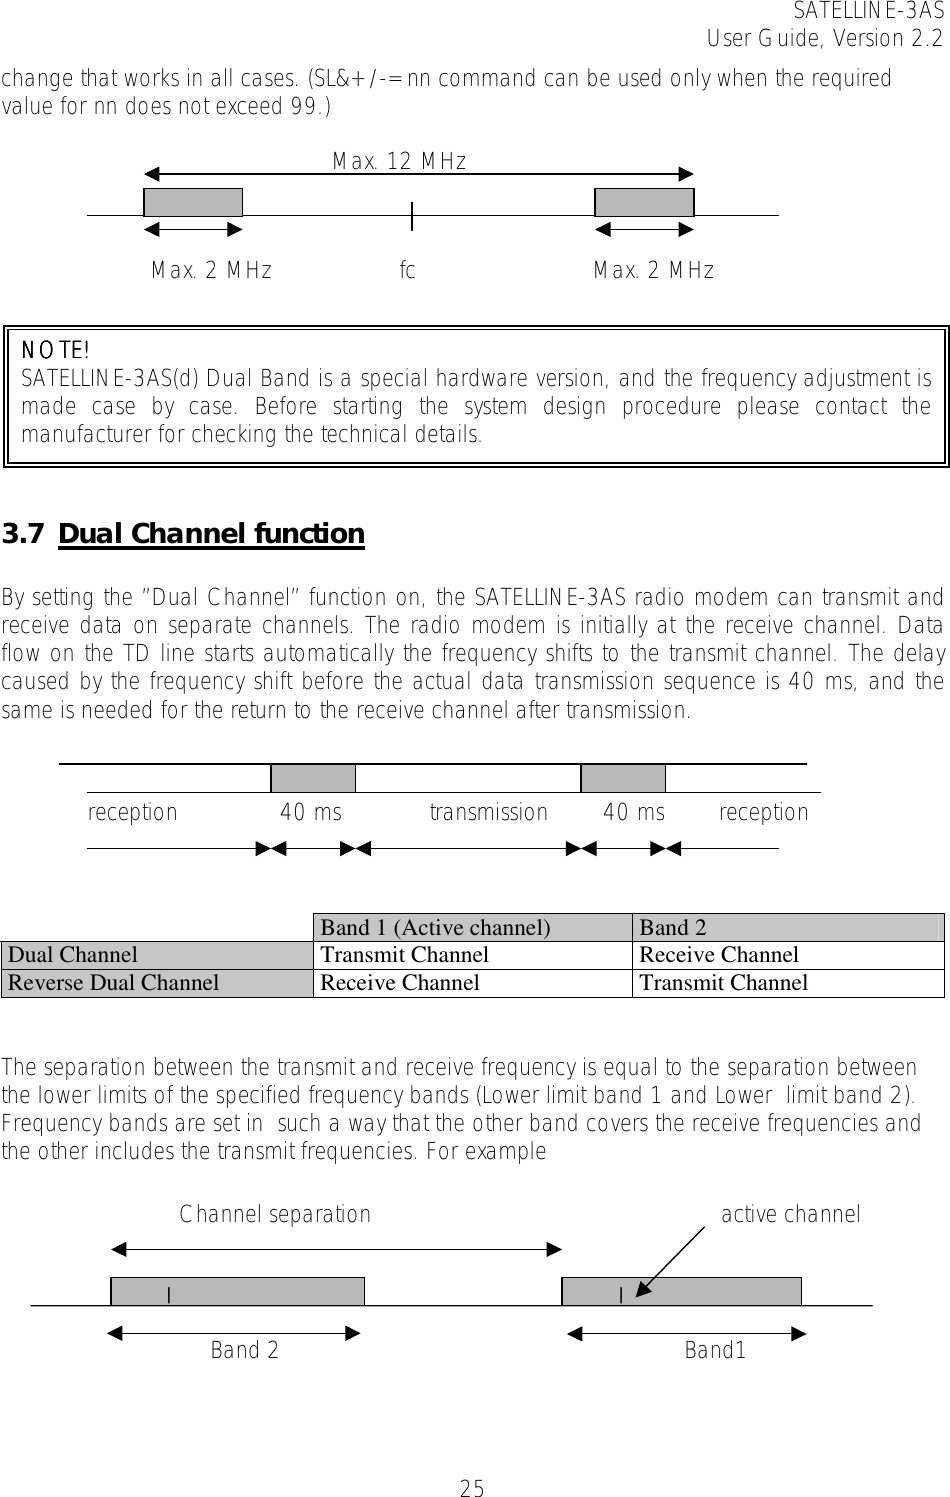 SATELLINE-3AS User Guide, Version 2.2   25reception               40 ms             transmission        40 ms        reception    Channel separation                            active channel              |                                               |                      Band 2                                         Band1     change that works in all cases. (SL&amp;+/-=nn command can be used only when the required value for nn does not exceed 99.)             Max. 12 MHz                          Max. 2 MHz                   fc                      Max. 2 MHz   3.7 Dual Channel function  By setting the ”Dual Channel” function on, the SATELLINE-3AS radio modem can transmit and receive data on separate channels. The radio modem is initially at the receive channel. Data flow on the TD line starts automatically the frequency shifts to the transmit channel. The delay caused by the frequency shift before the actual data transmission sequence is 40 ms, and the same is needed for the return to the receive channel after transmission.         Band 1 (Active channel)  Band 2 Dual Channel  Transmit Channel  Receive Channel Reverse Dual Channel  Receive Channel  Transmit Channel   The separation between the transmit and receive frequency is equal to the separation between the lower limits of the specified frequency bands (Lower limit band 1 and Lower  limit band 2). Frequency bands are set in  such a way that the other band covers the receive frequencies and the other includes the transmit frequencies. For example          NOTE!NOTE!NOTE!NOTE!  SATELLINE-3AS(d) Dual Band is a special hardware version, and the frequency adjustment ismade case by case. Before starting the system design procedure please contact the manufacturer for checking the technical details. 